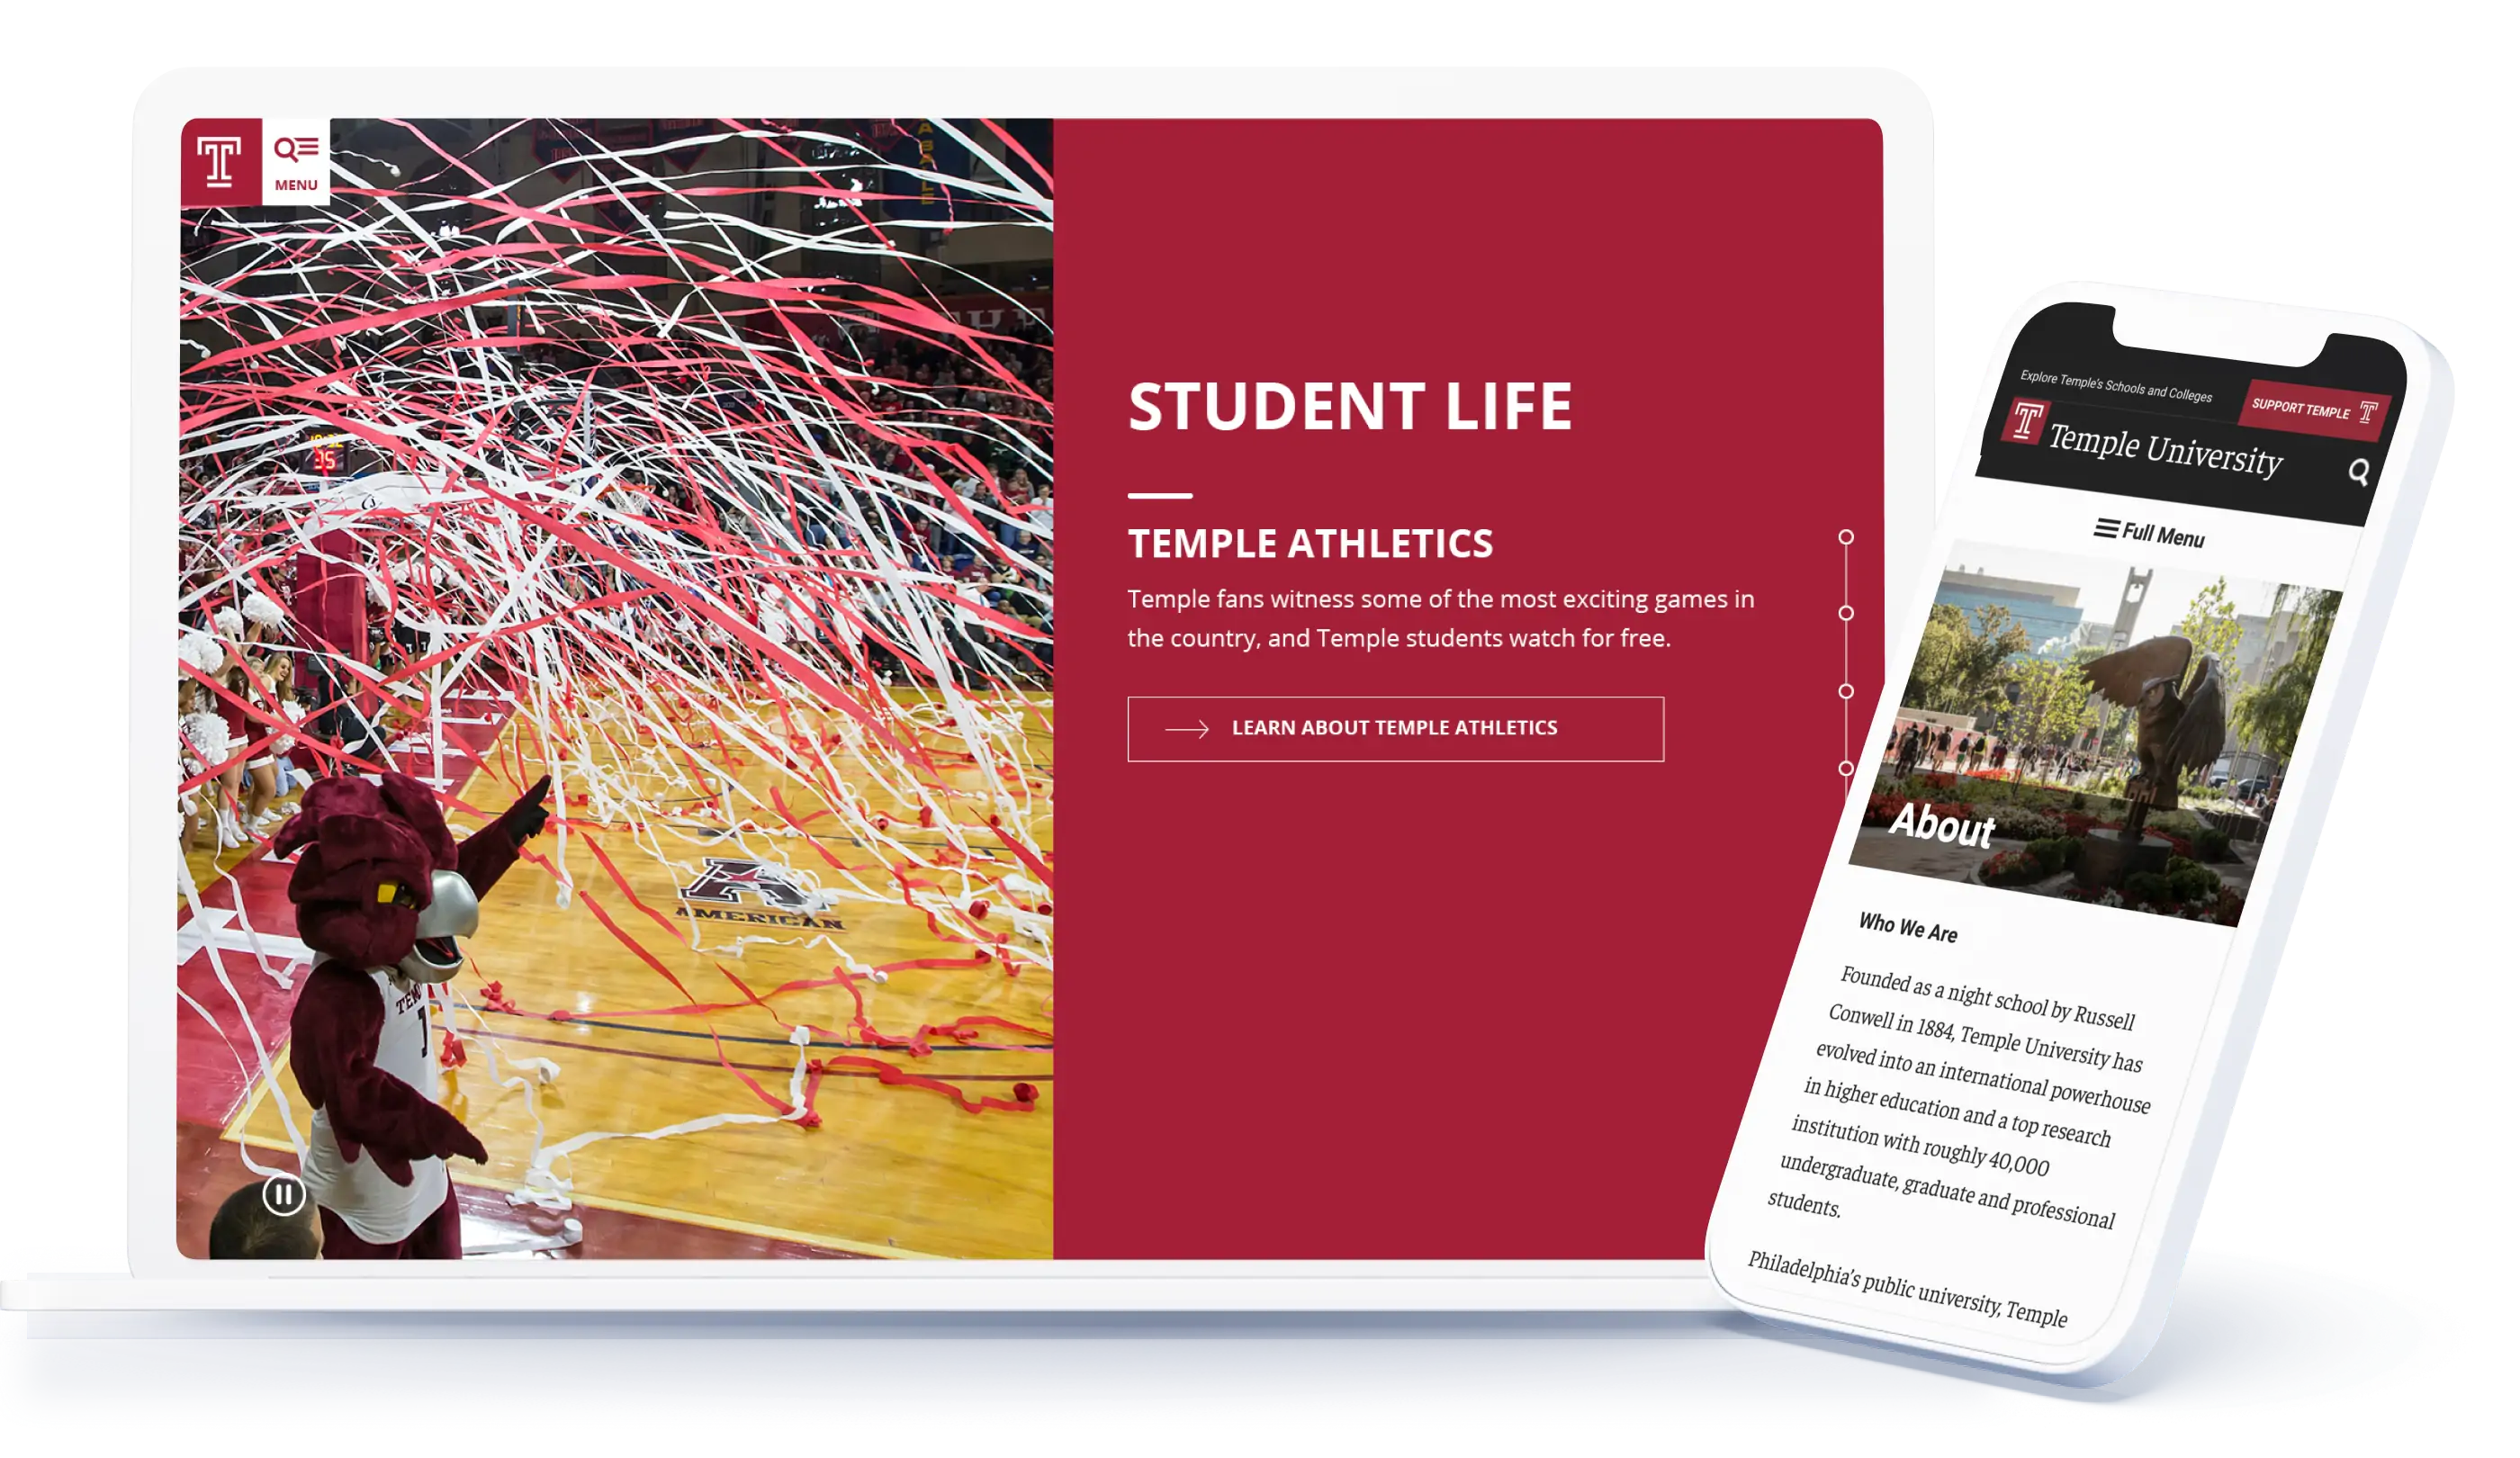 Temple University website as seen on Tablet and mobile devices